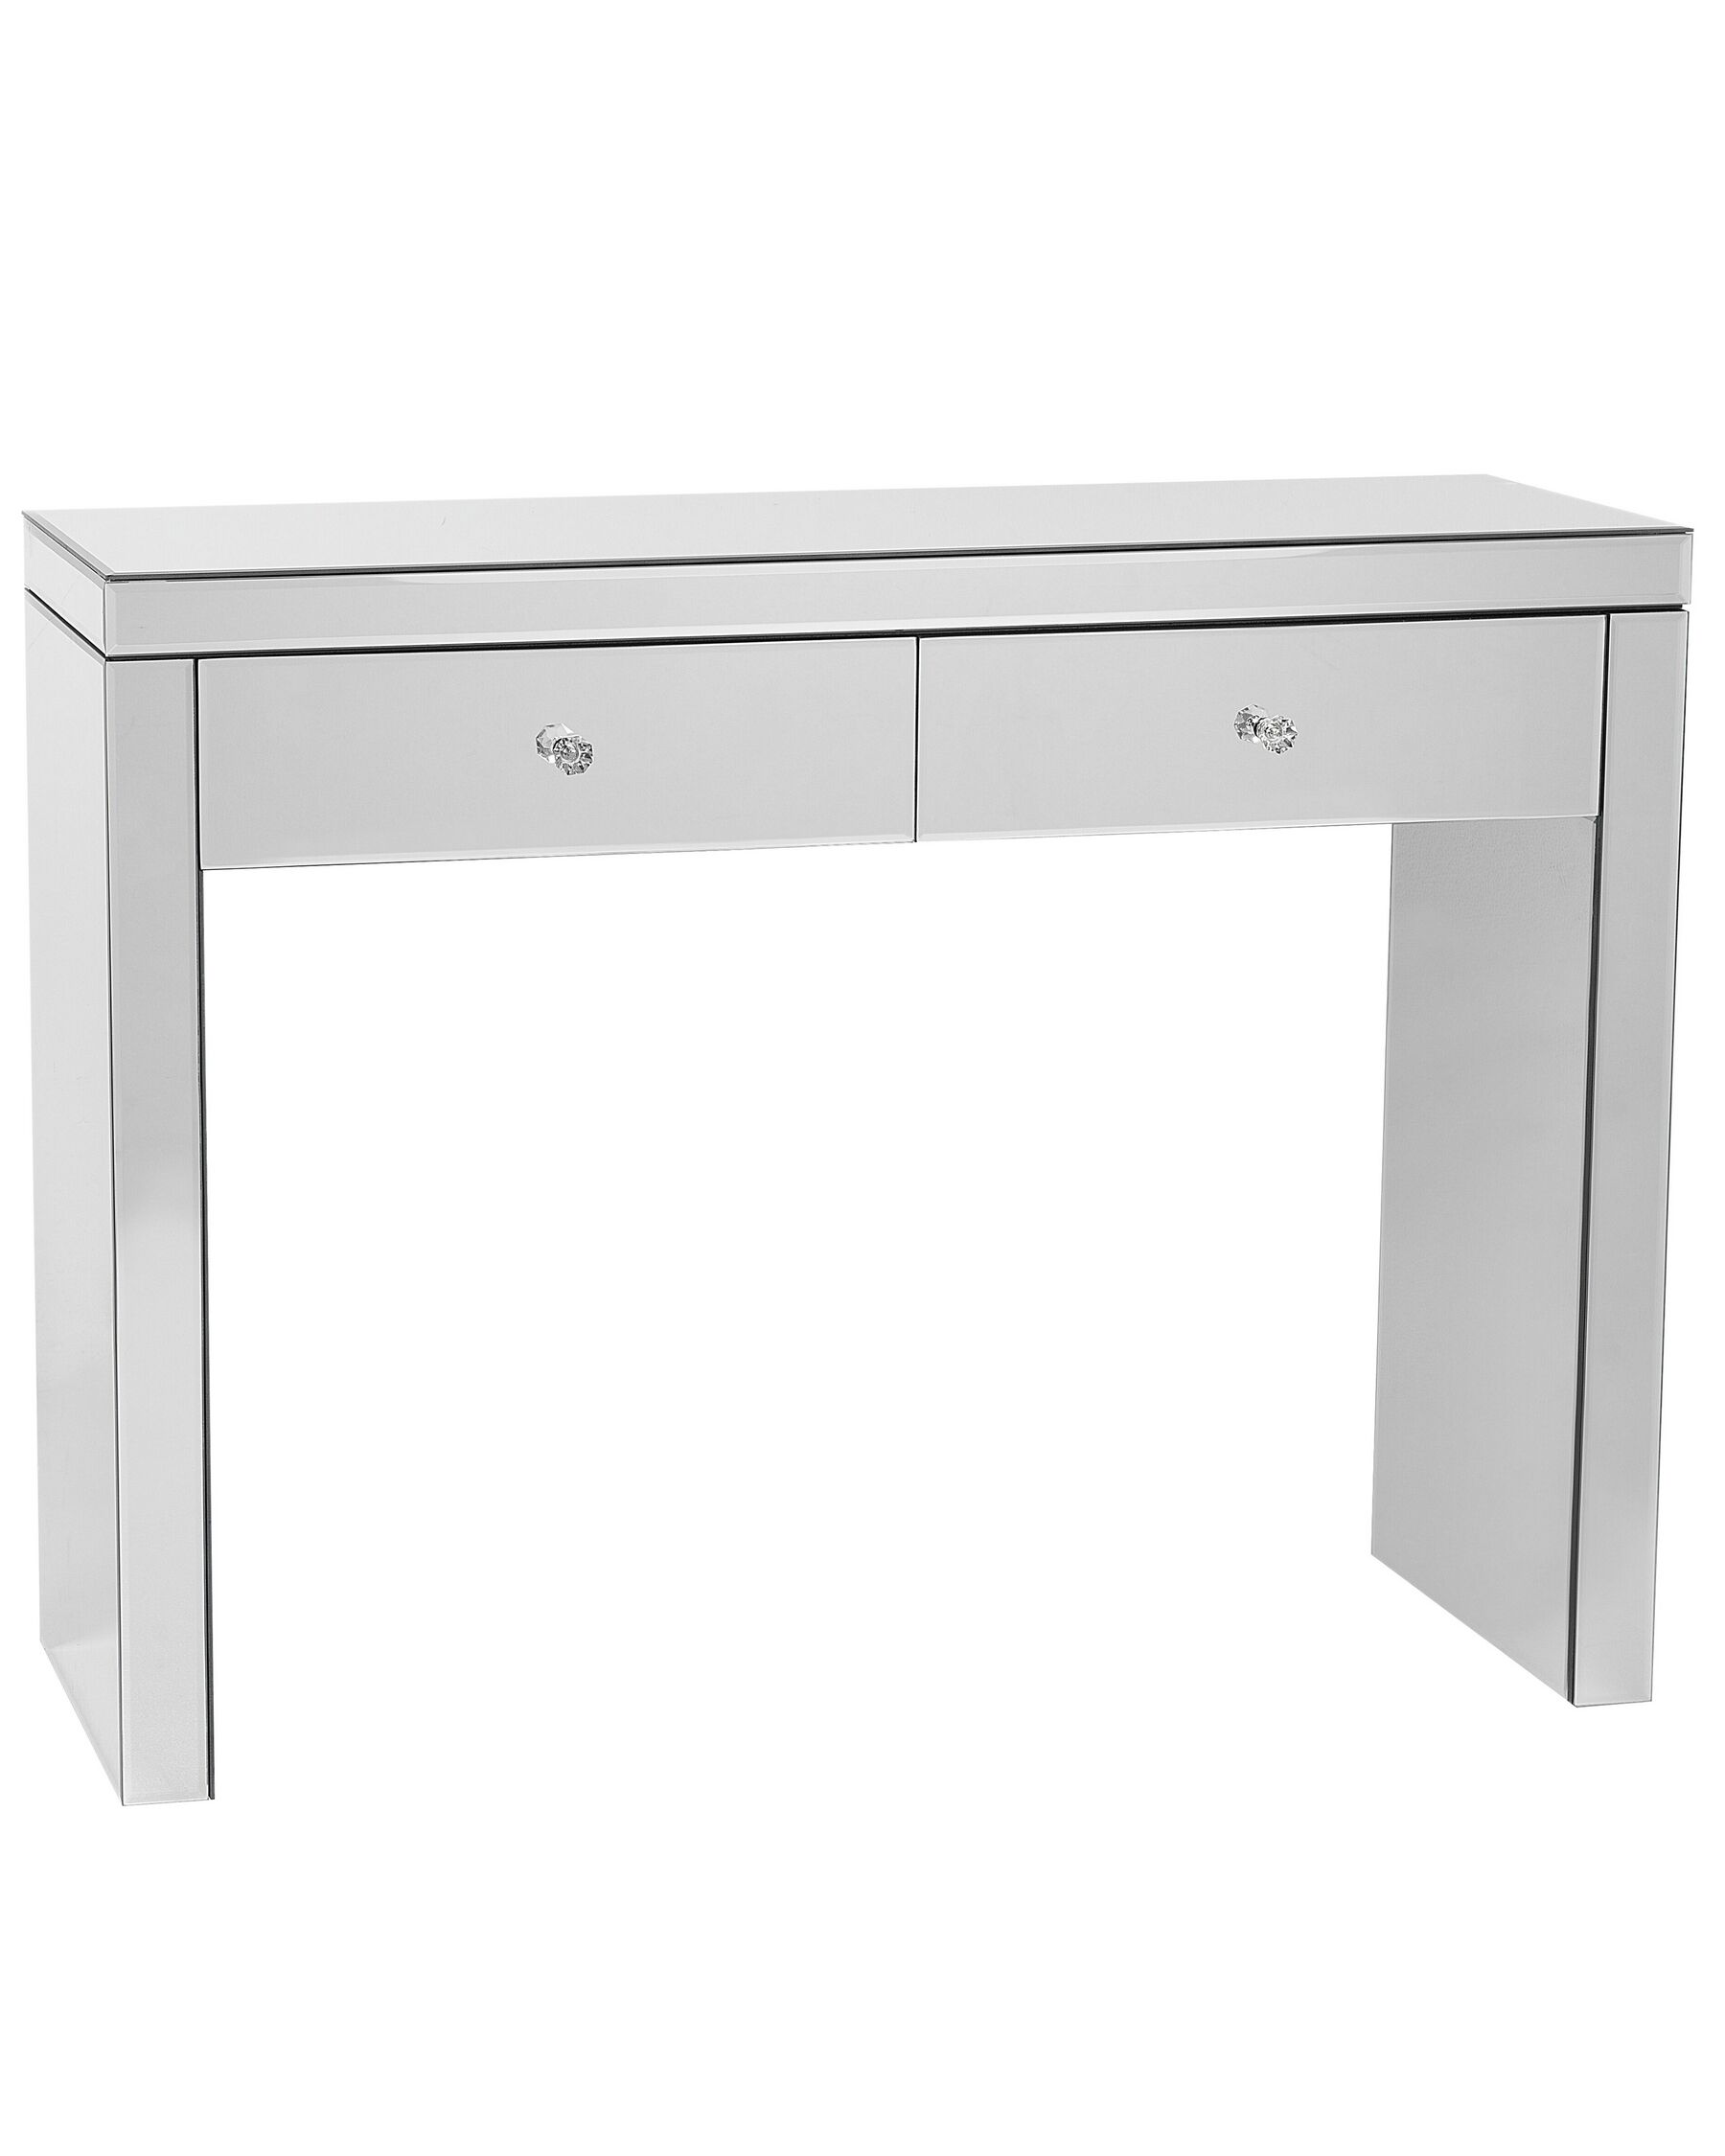 Modern Mirrored Sideboard Silver Console Table 2 Drawer Storage Glass Marle